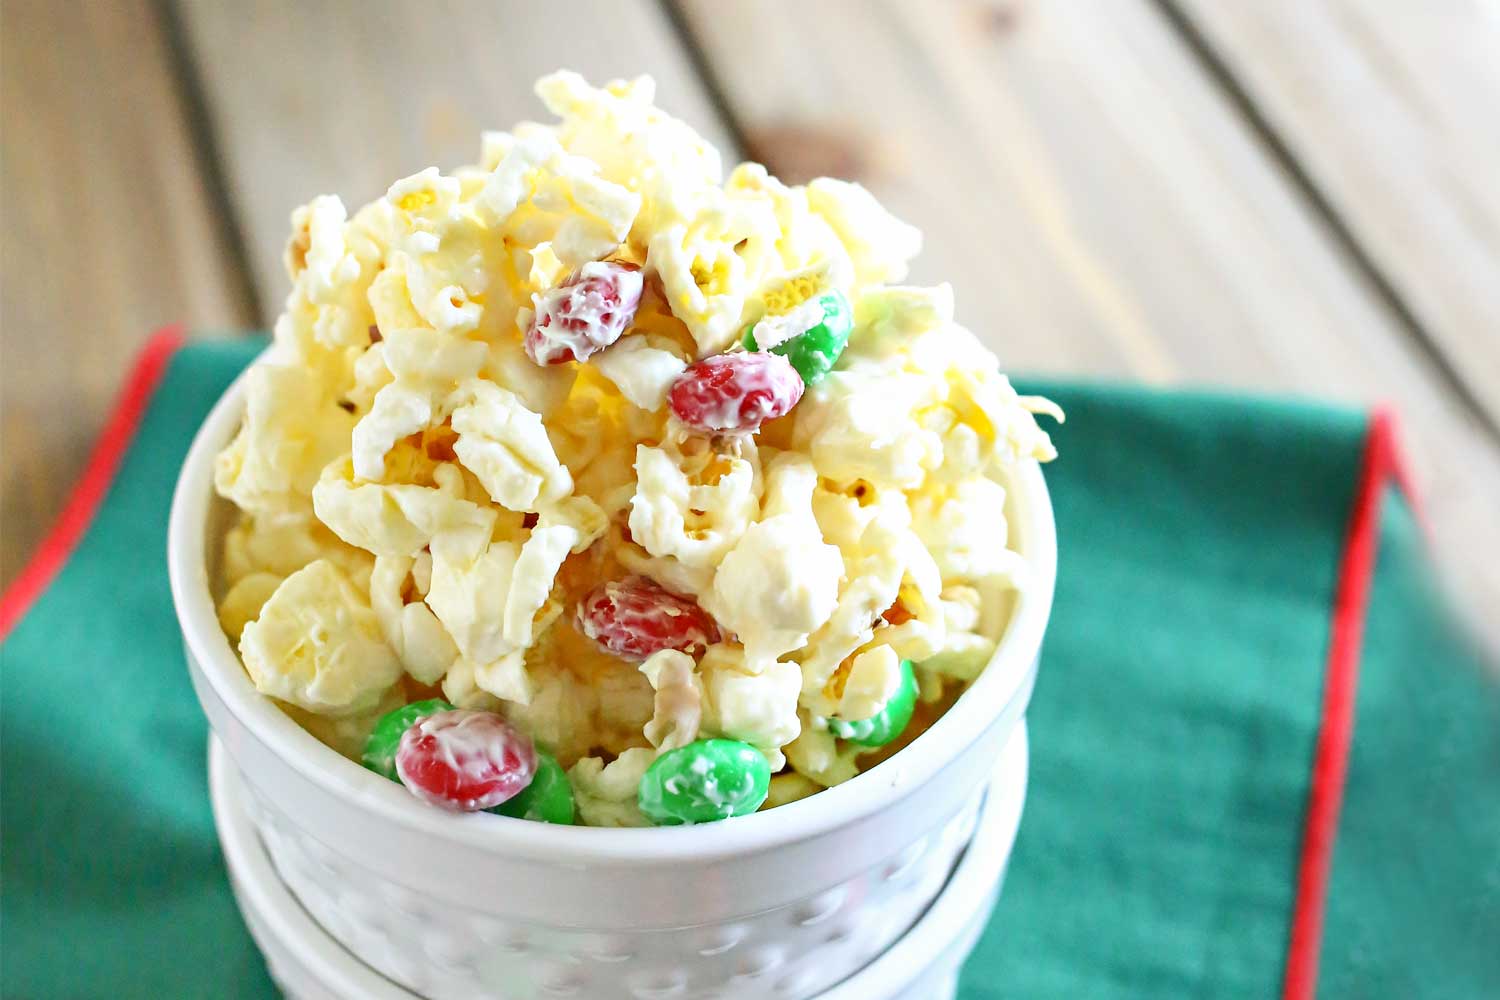 Scoop the white chocolate popcorn into serving containers.